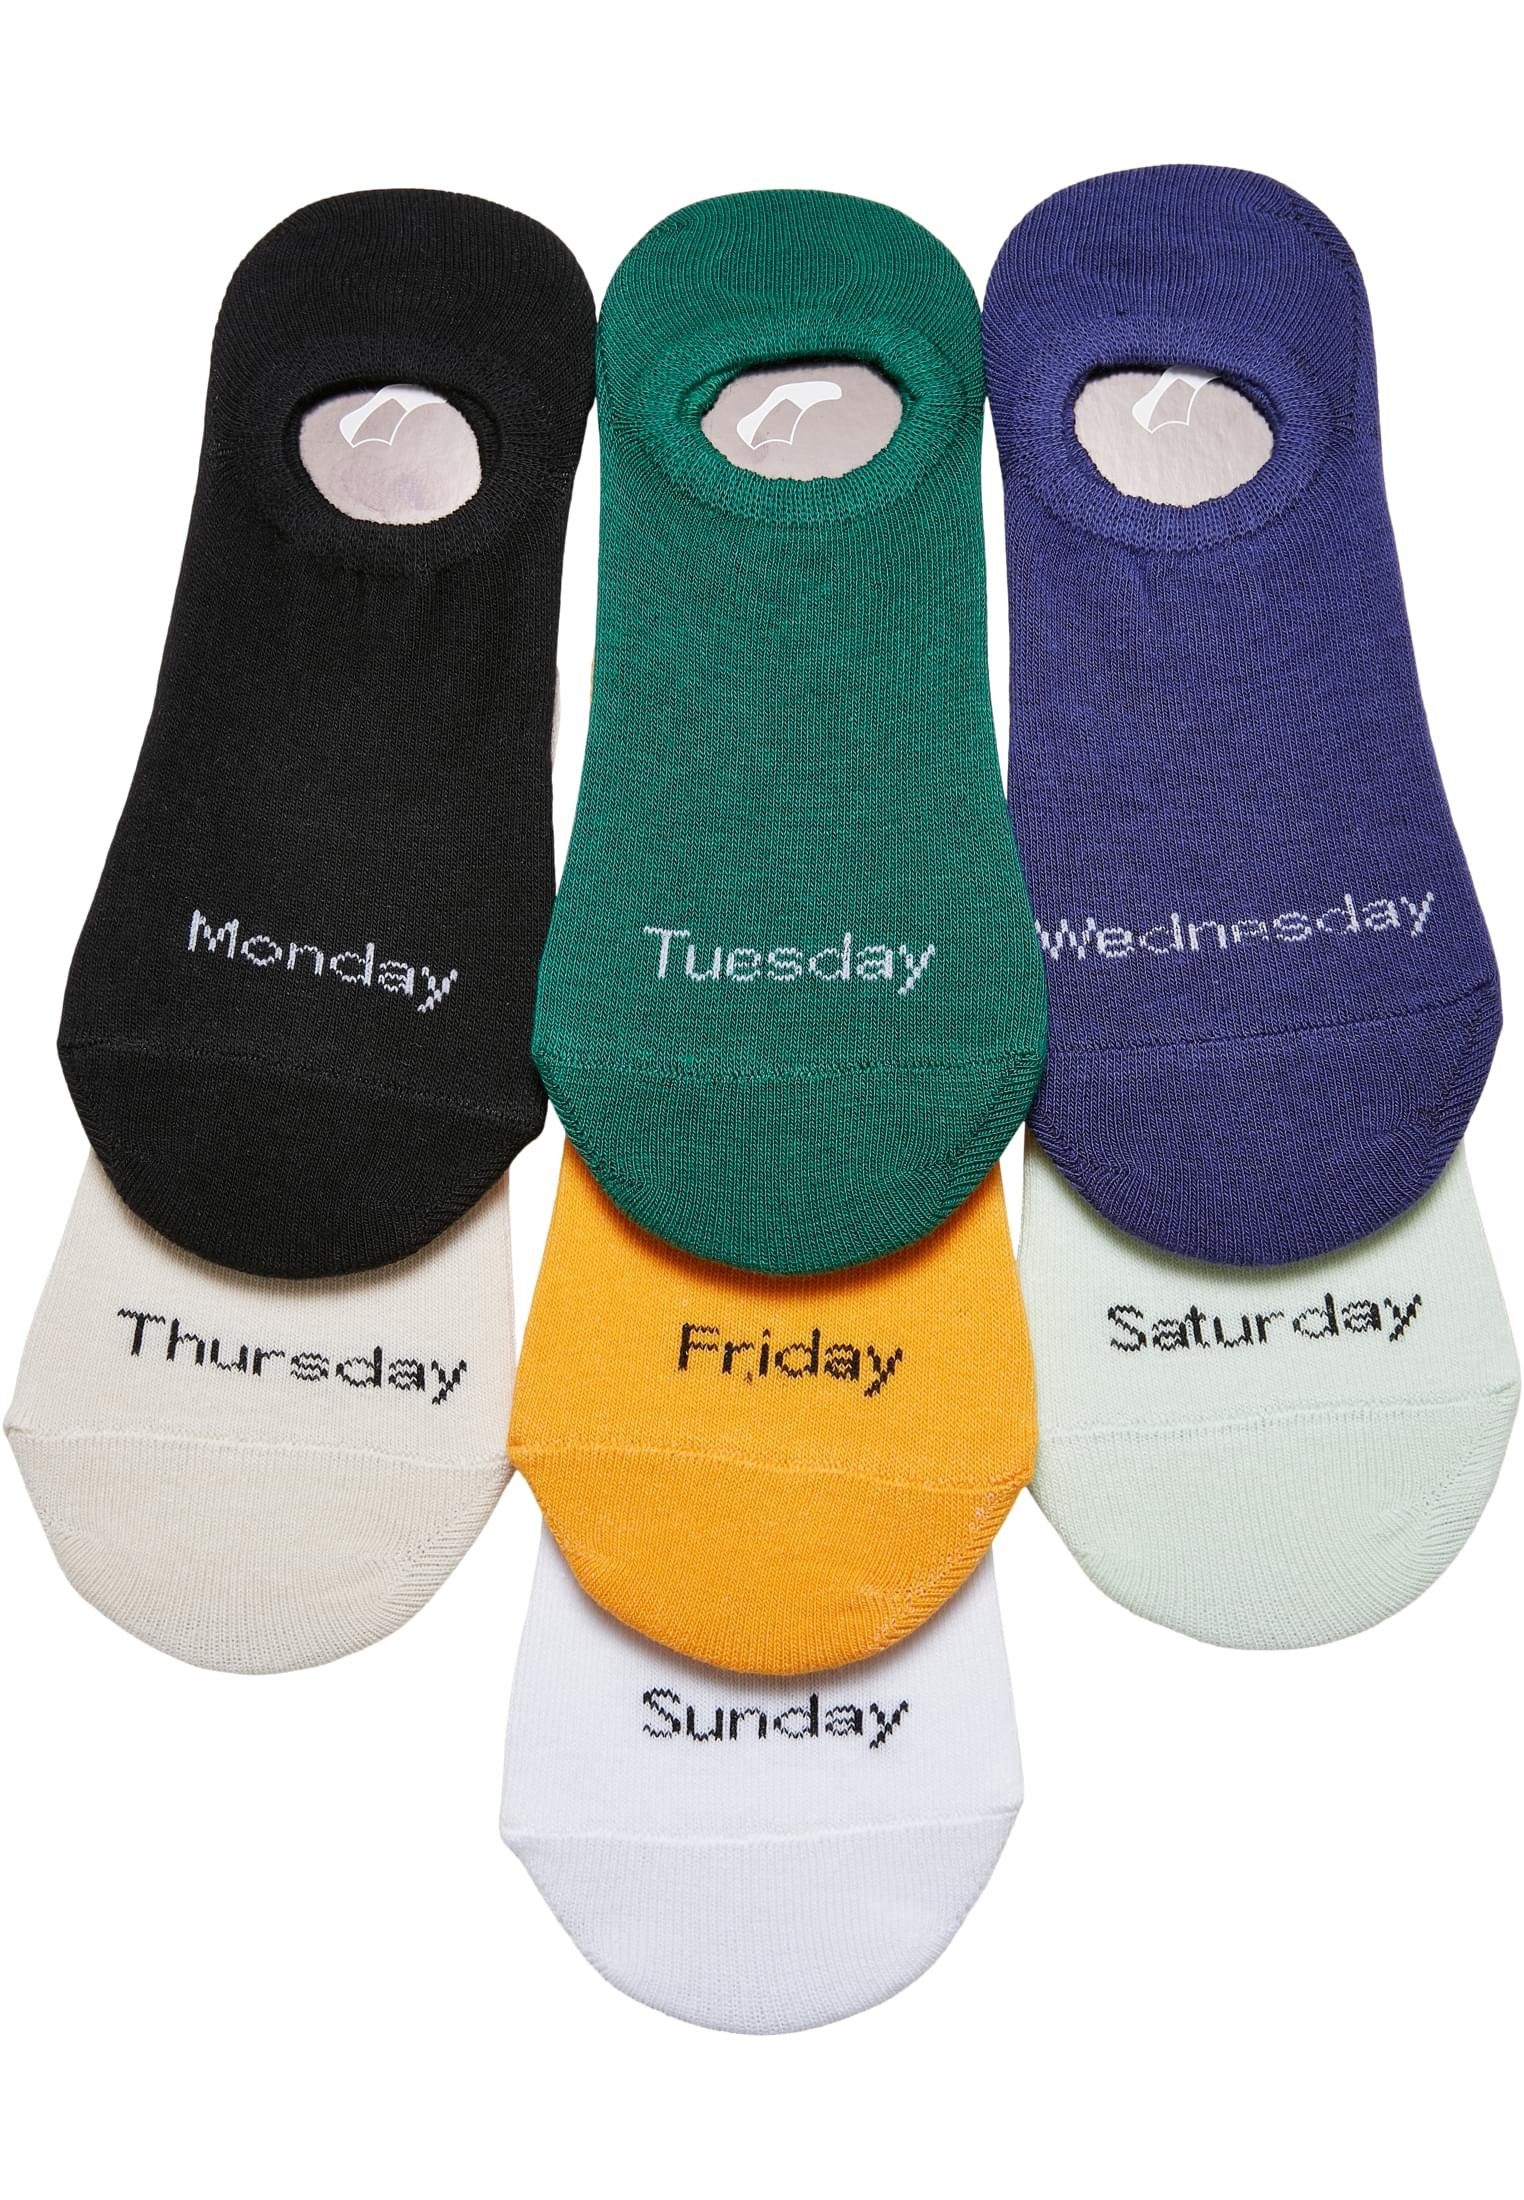 Freizeitsocken URBAN multicolor Socks Weekly Accessoires 7-Pack Invisible (1-Paar) CLASSICS